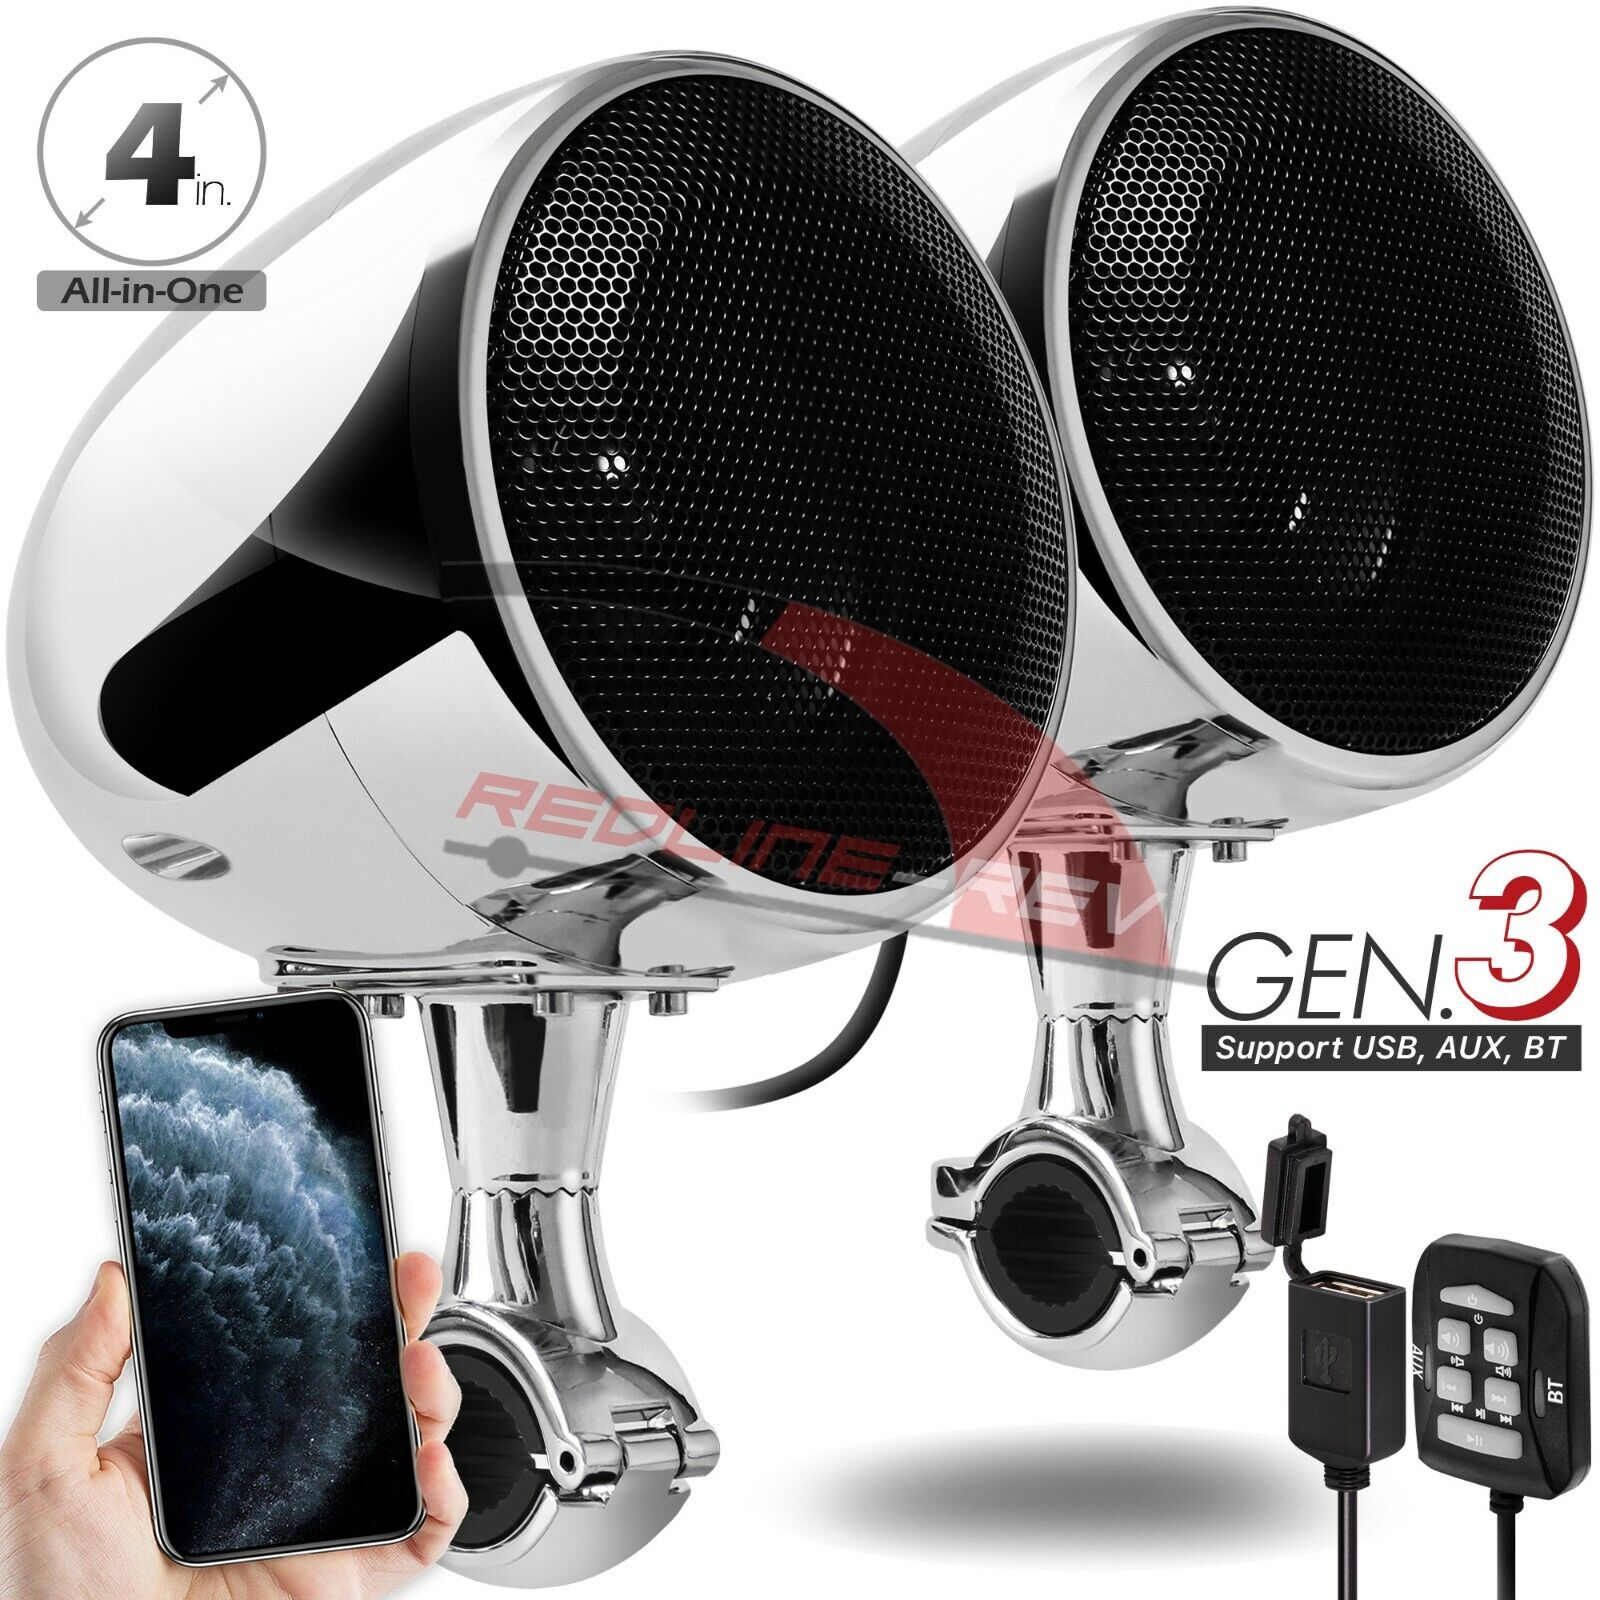 Refurb 300W Bluetooth Motorcycle Audio Stereo Chrome Speakers System Harley USB